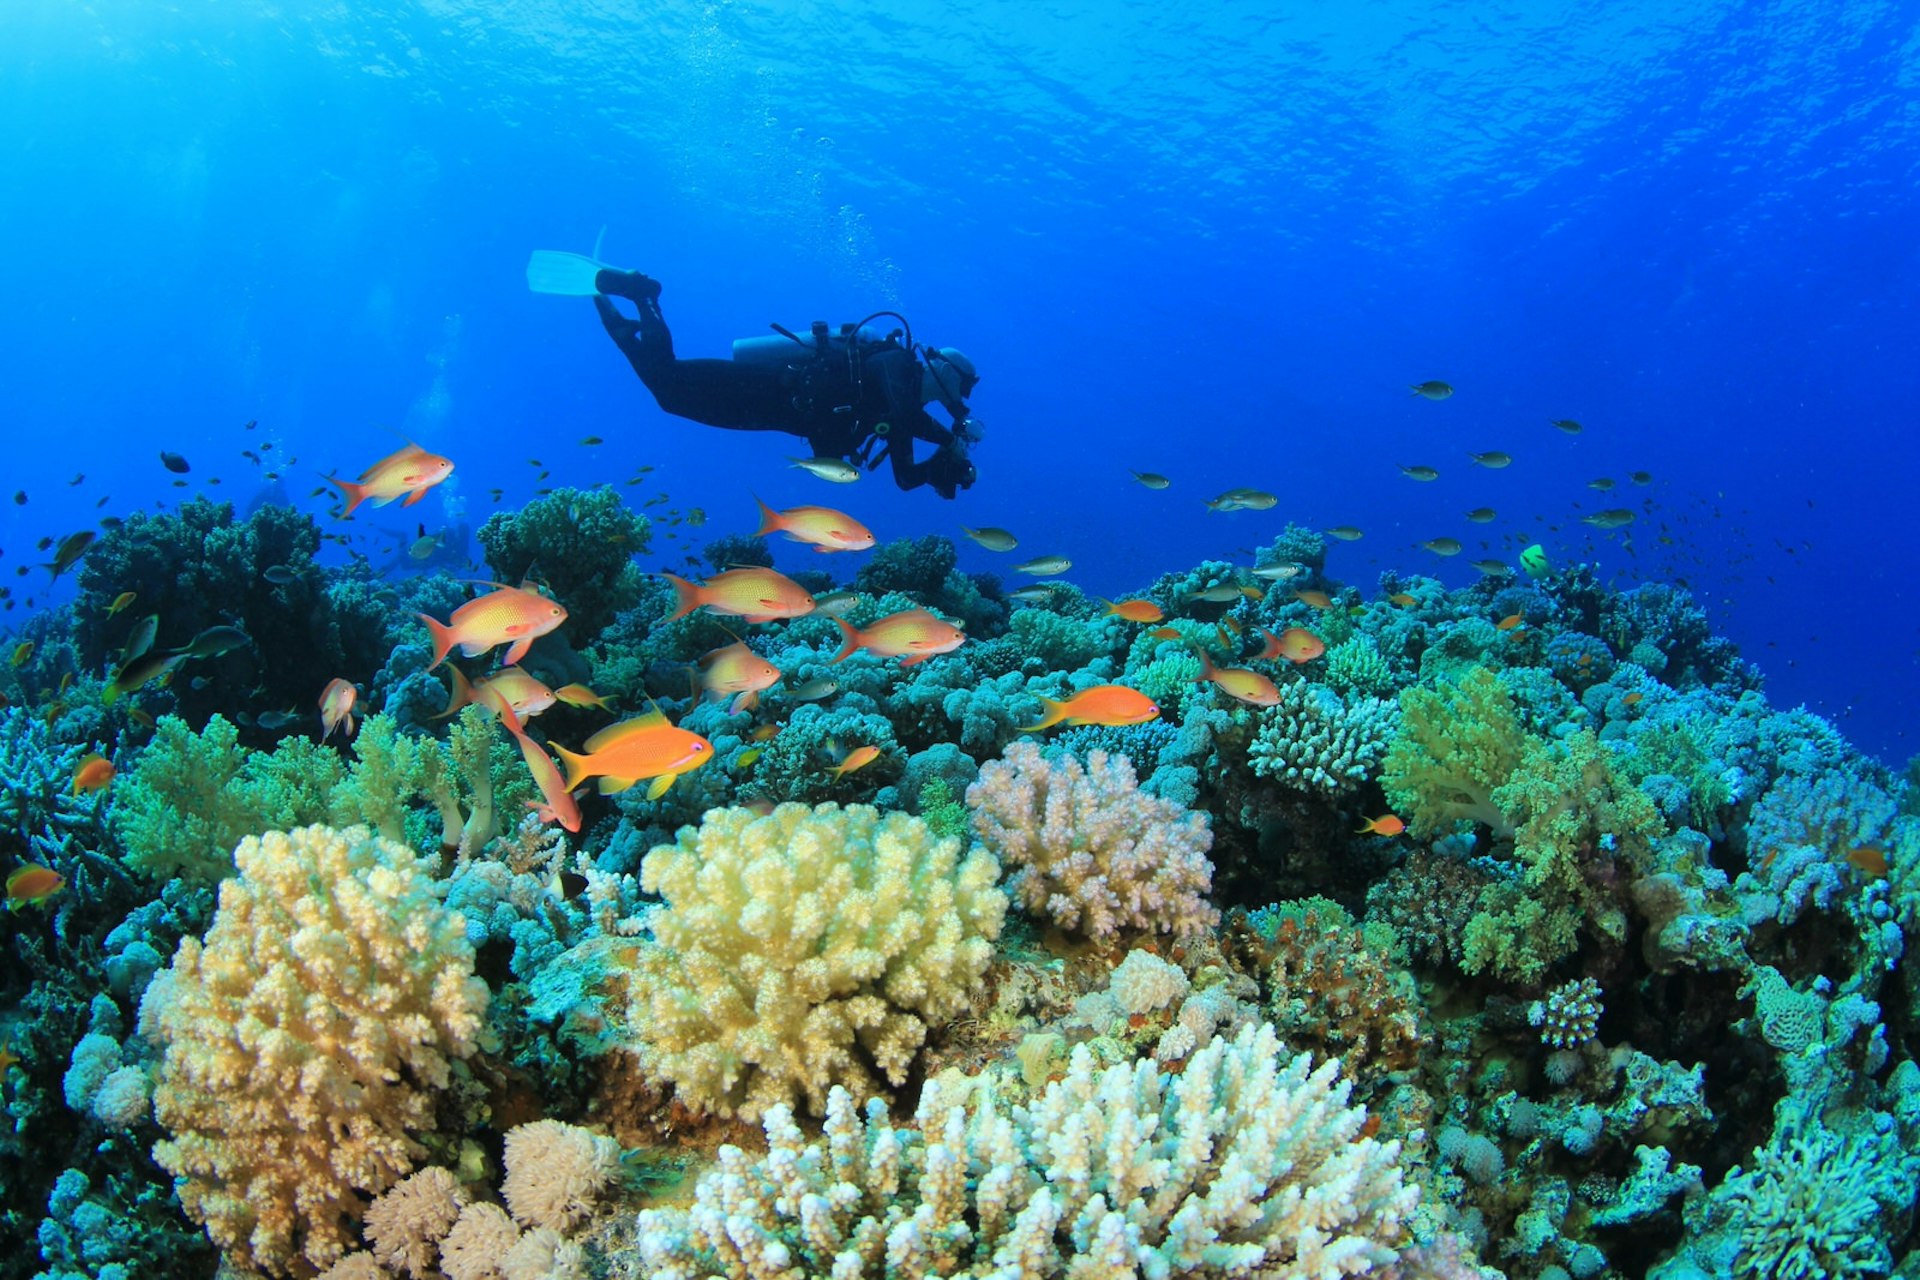 Scuba diver exploring a reef in the Philippines © Rich Carey / Shutterstock